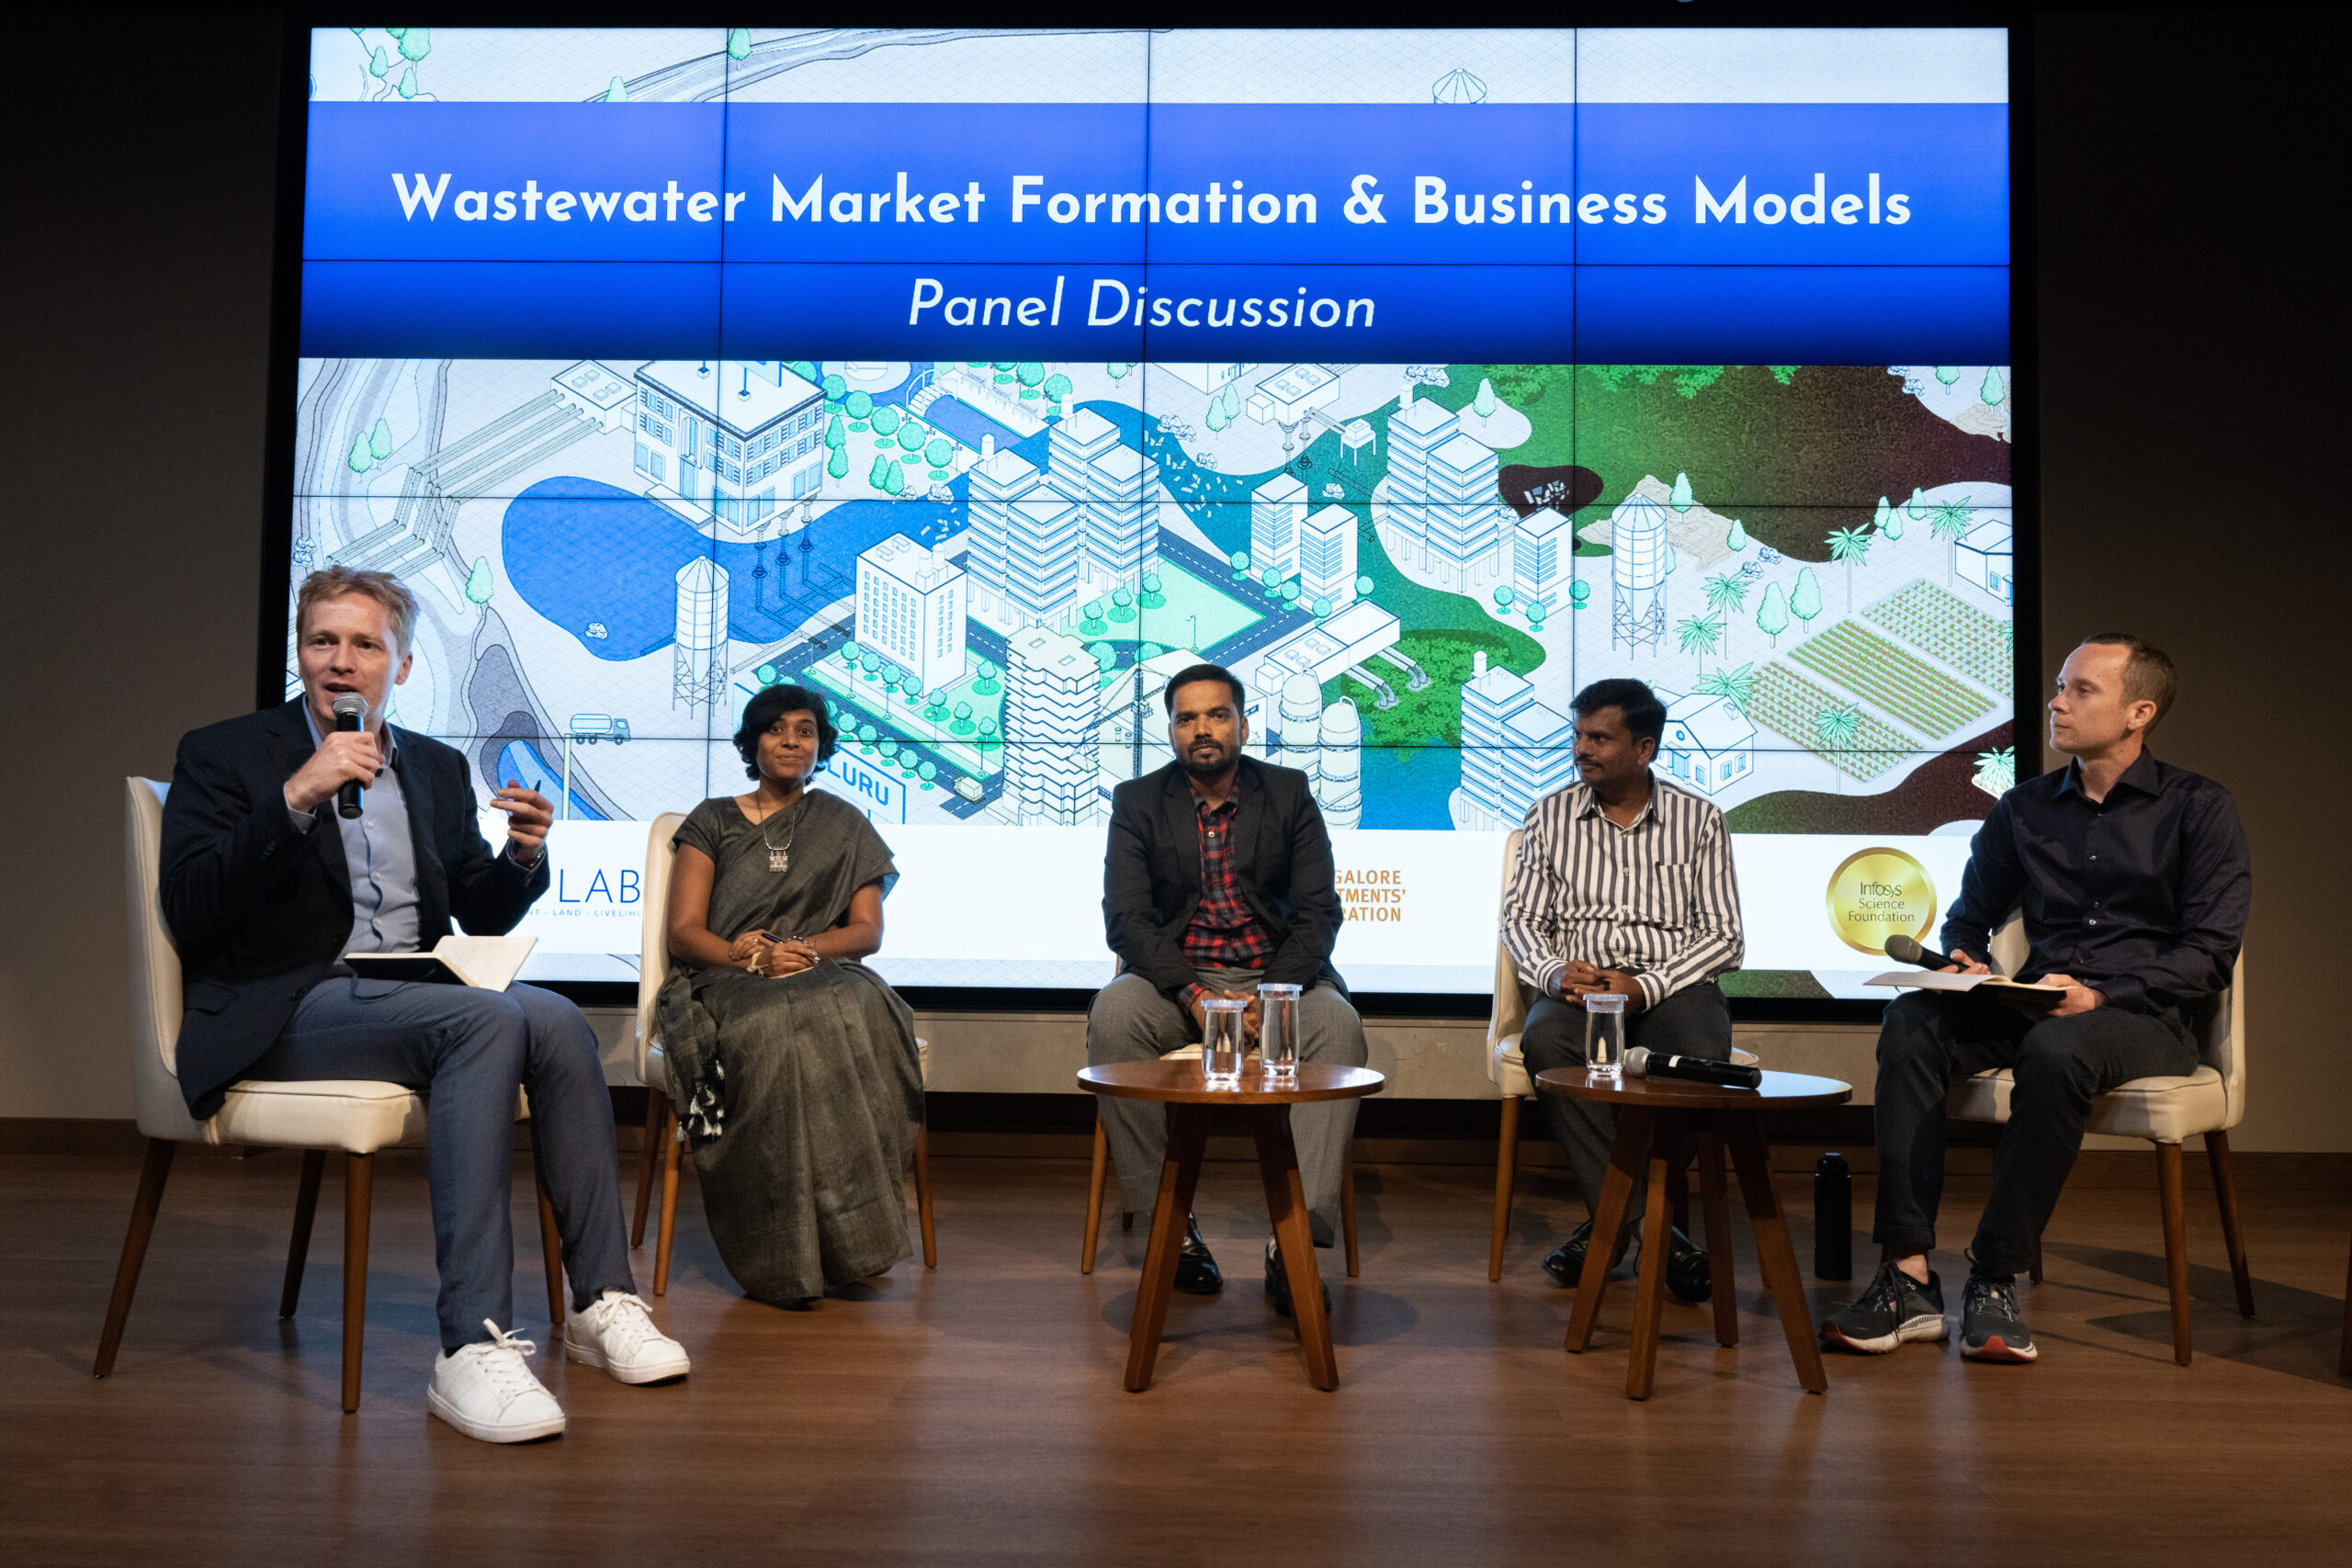 Panellists - Mr Gowthaman Desingh, Ms Moulya Donthi, Mr Vijay Kumar N - discuss wastewater markets and business models in a discussion moderated by EAWAG's Dr Christian Binz and Dr Johan Miörner.